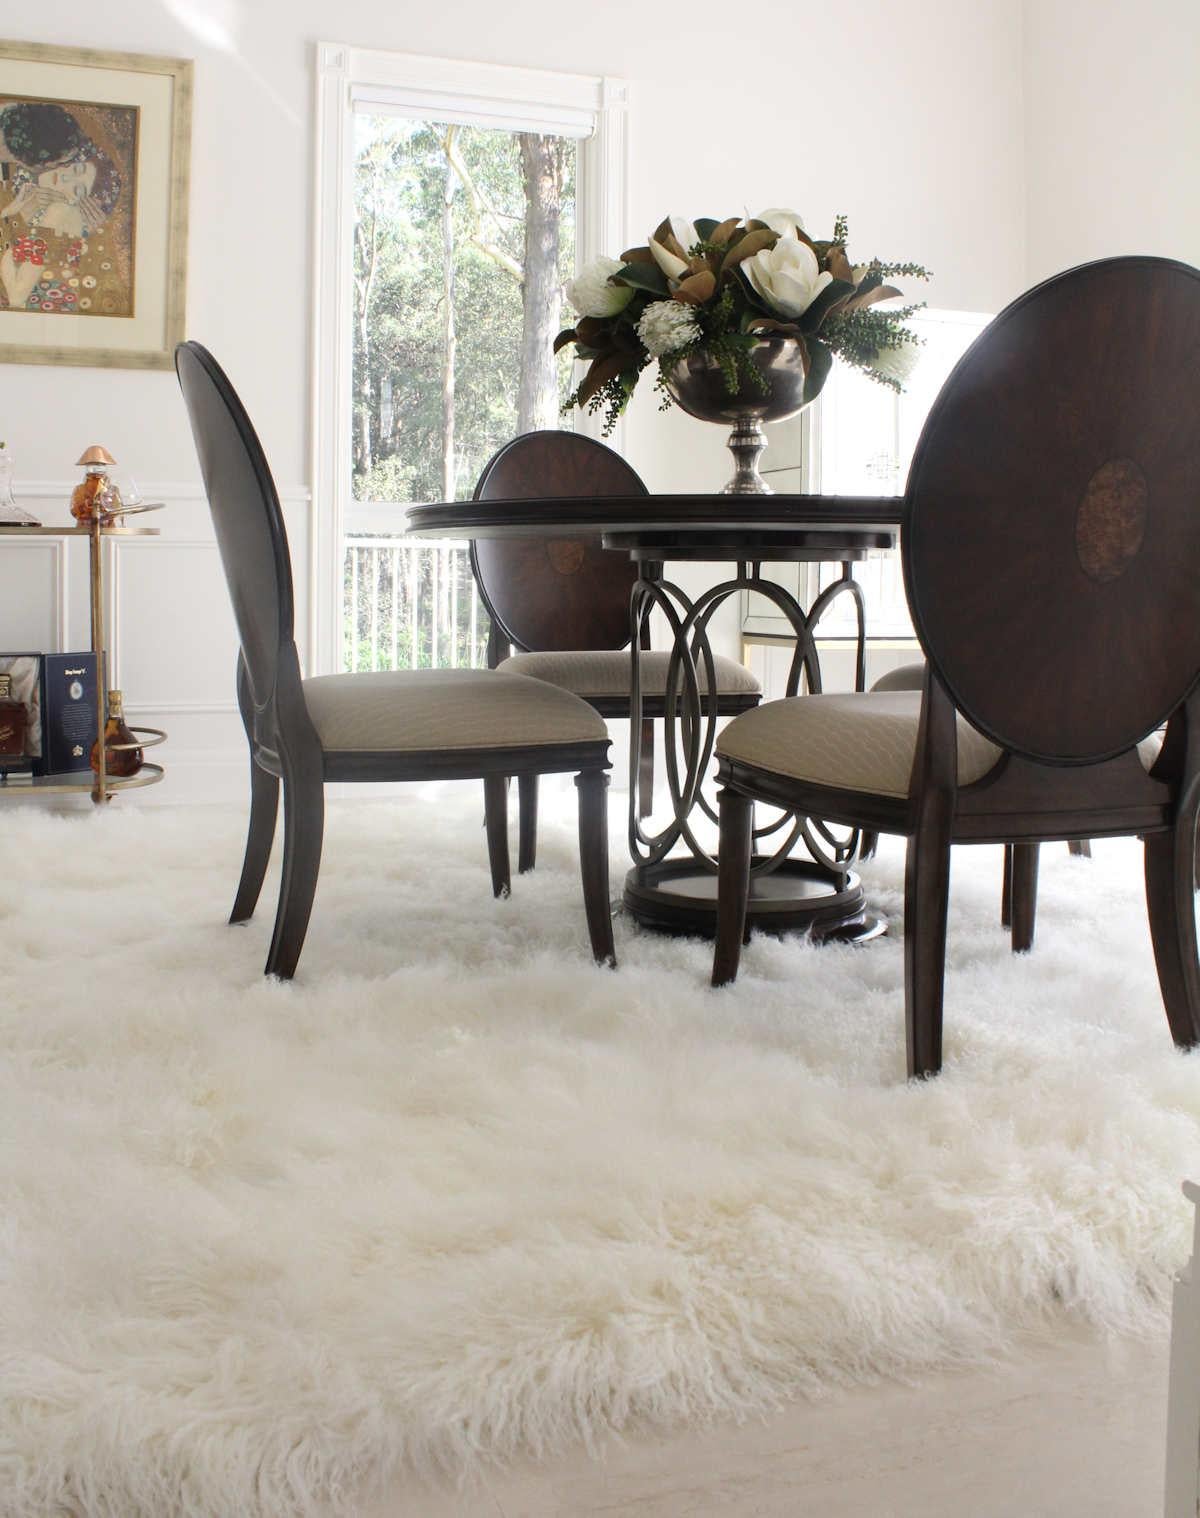 Style your interior floors with the beauty of a natural sheepskin rug that looks and feels luxurious while adding the natural charm, warmth, and character that sheepskin has to offer. Handcrafted from genuine Tibetan lambskins also known as